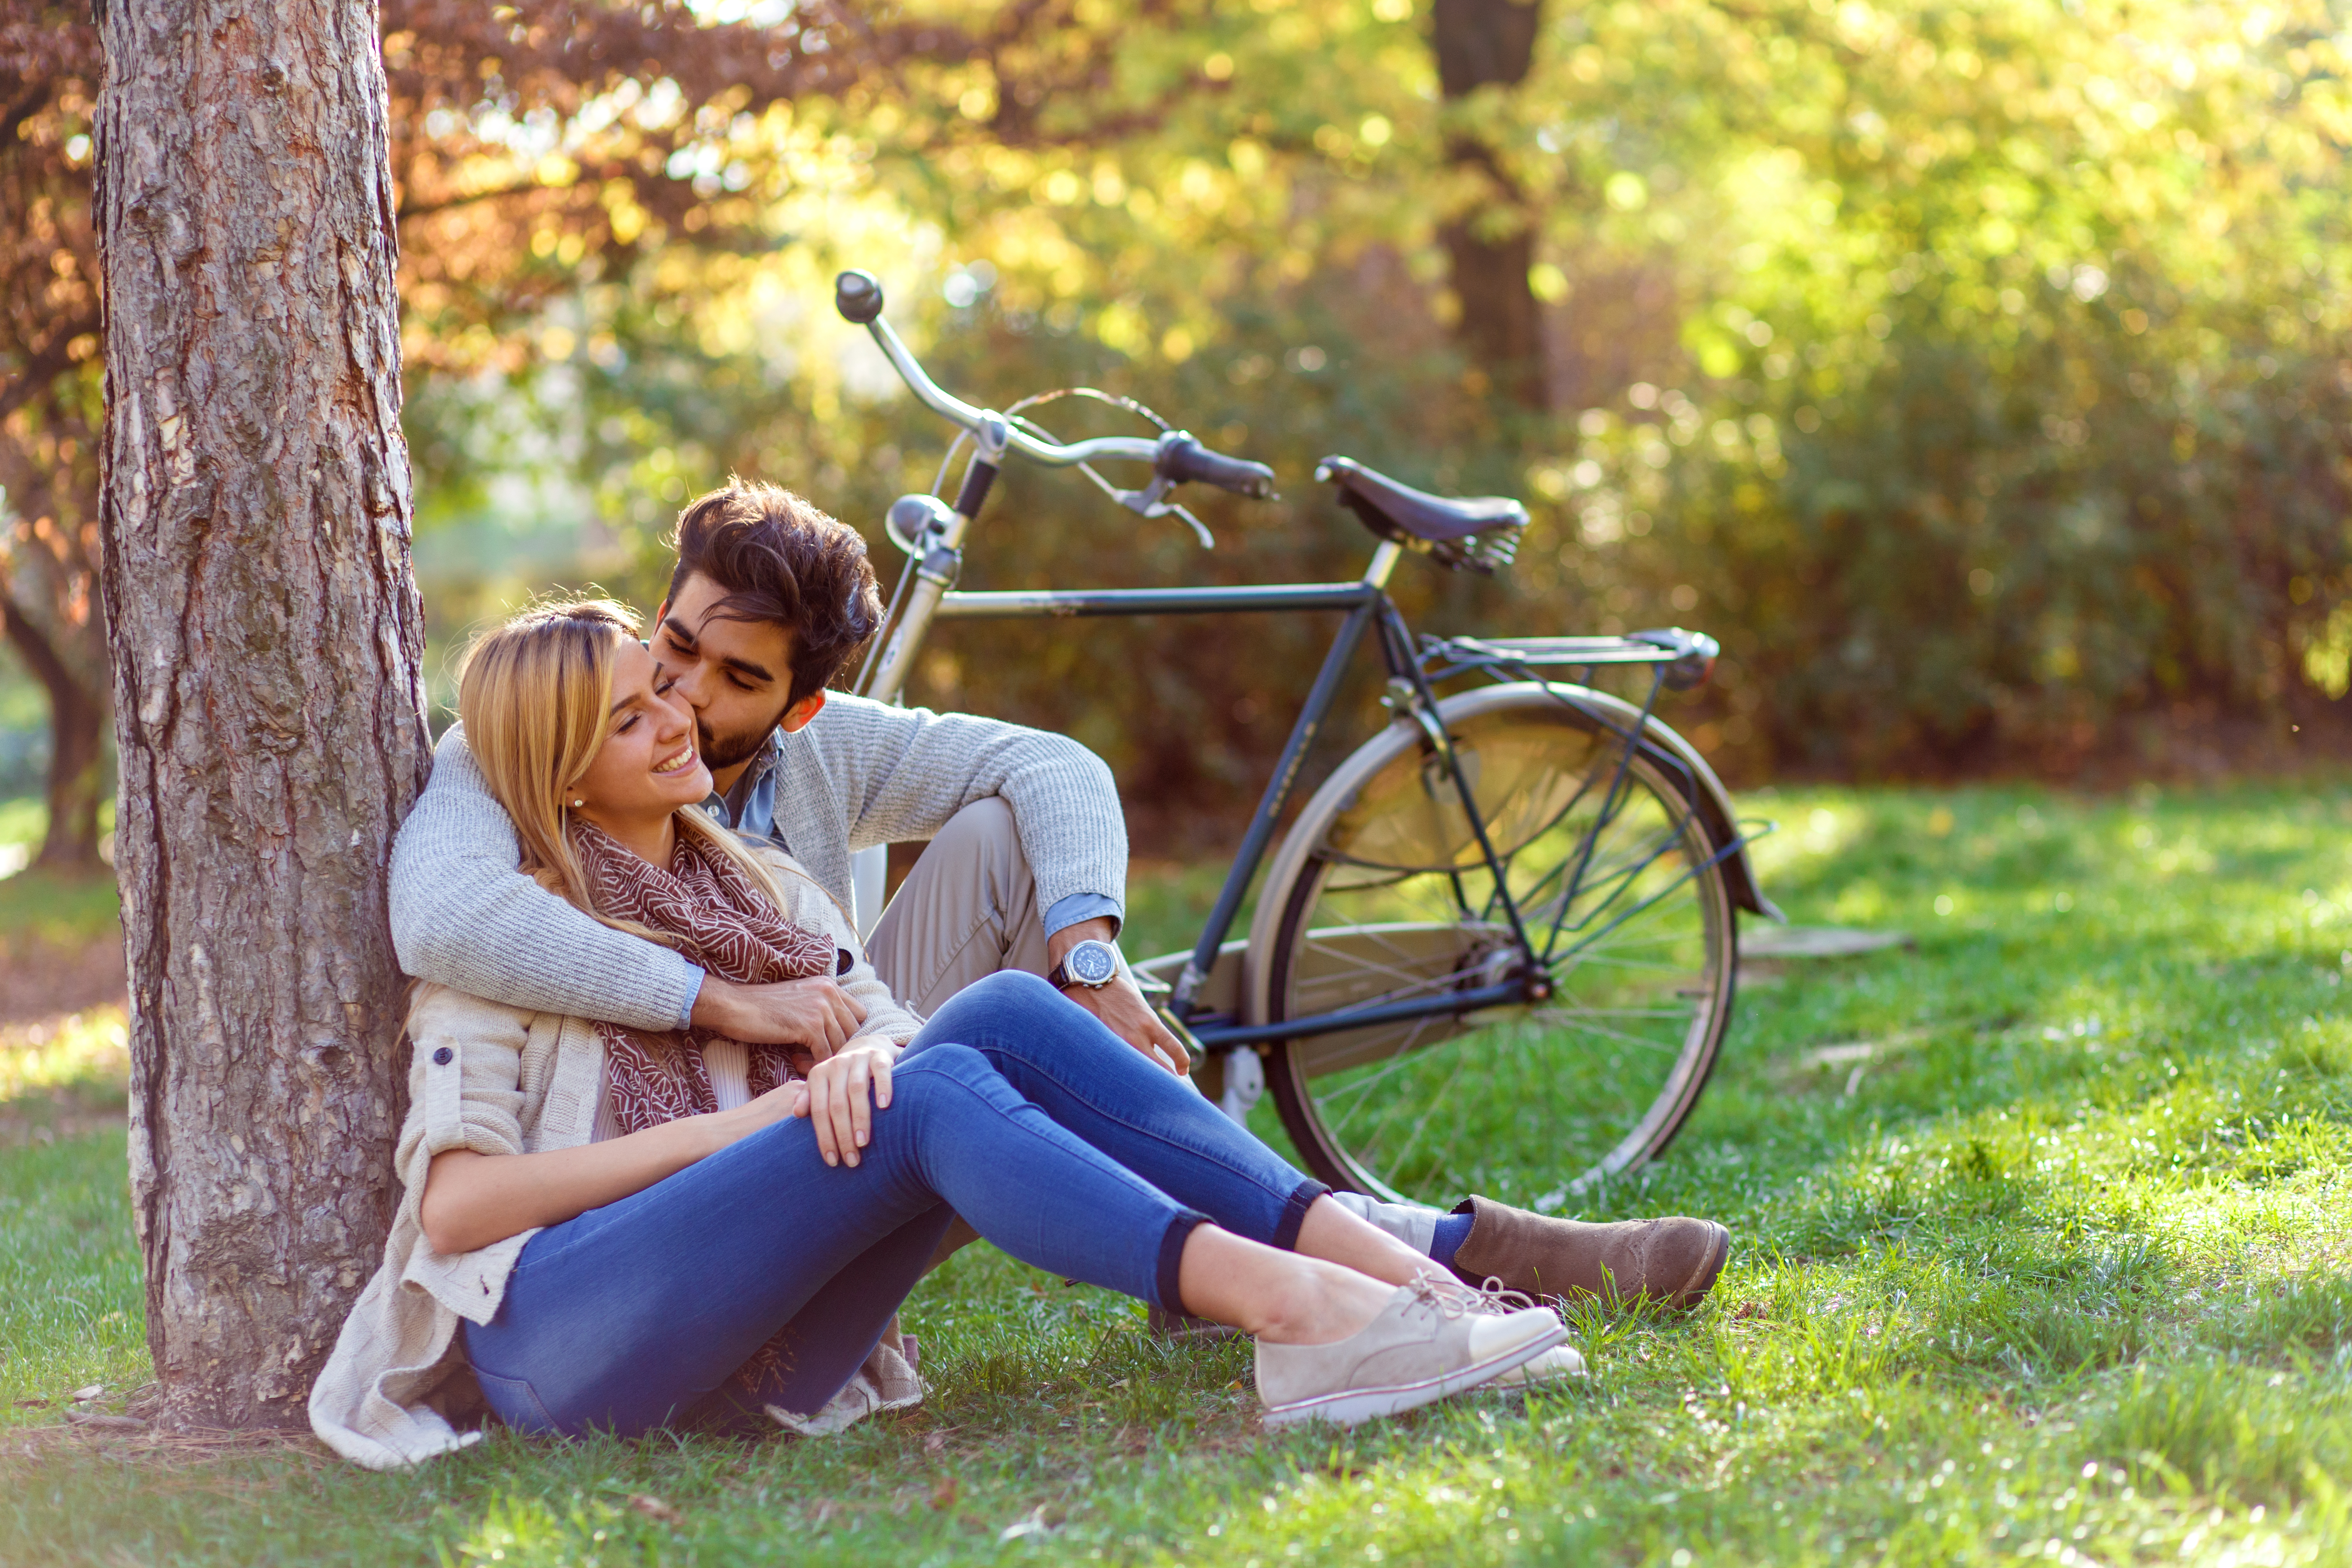 A man kissing his girlfriend in a park | Source: Shutterstock